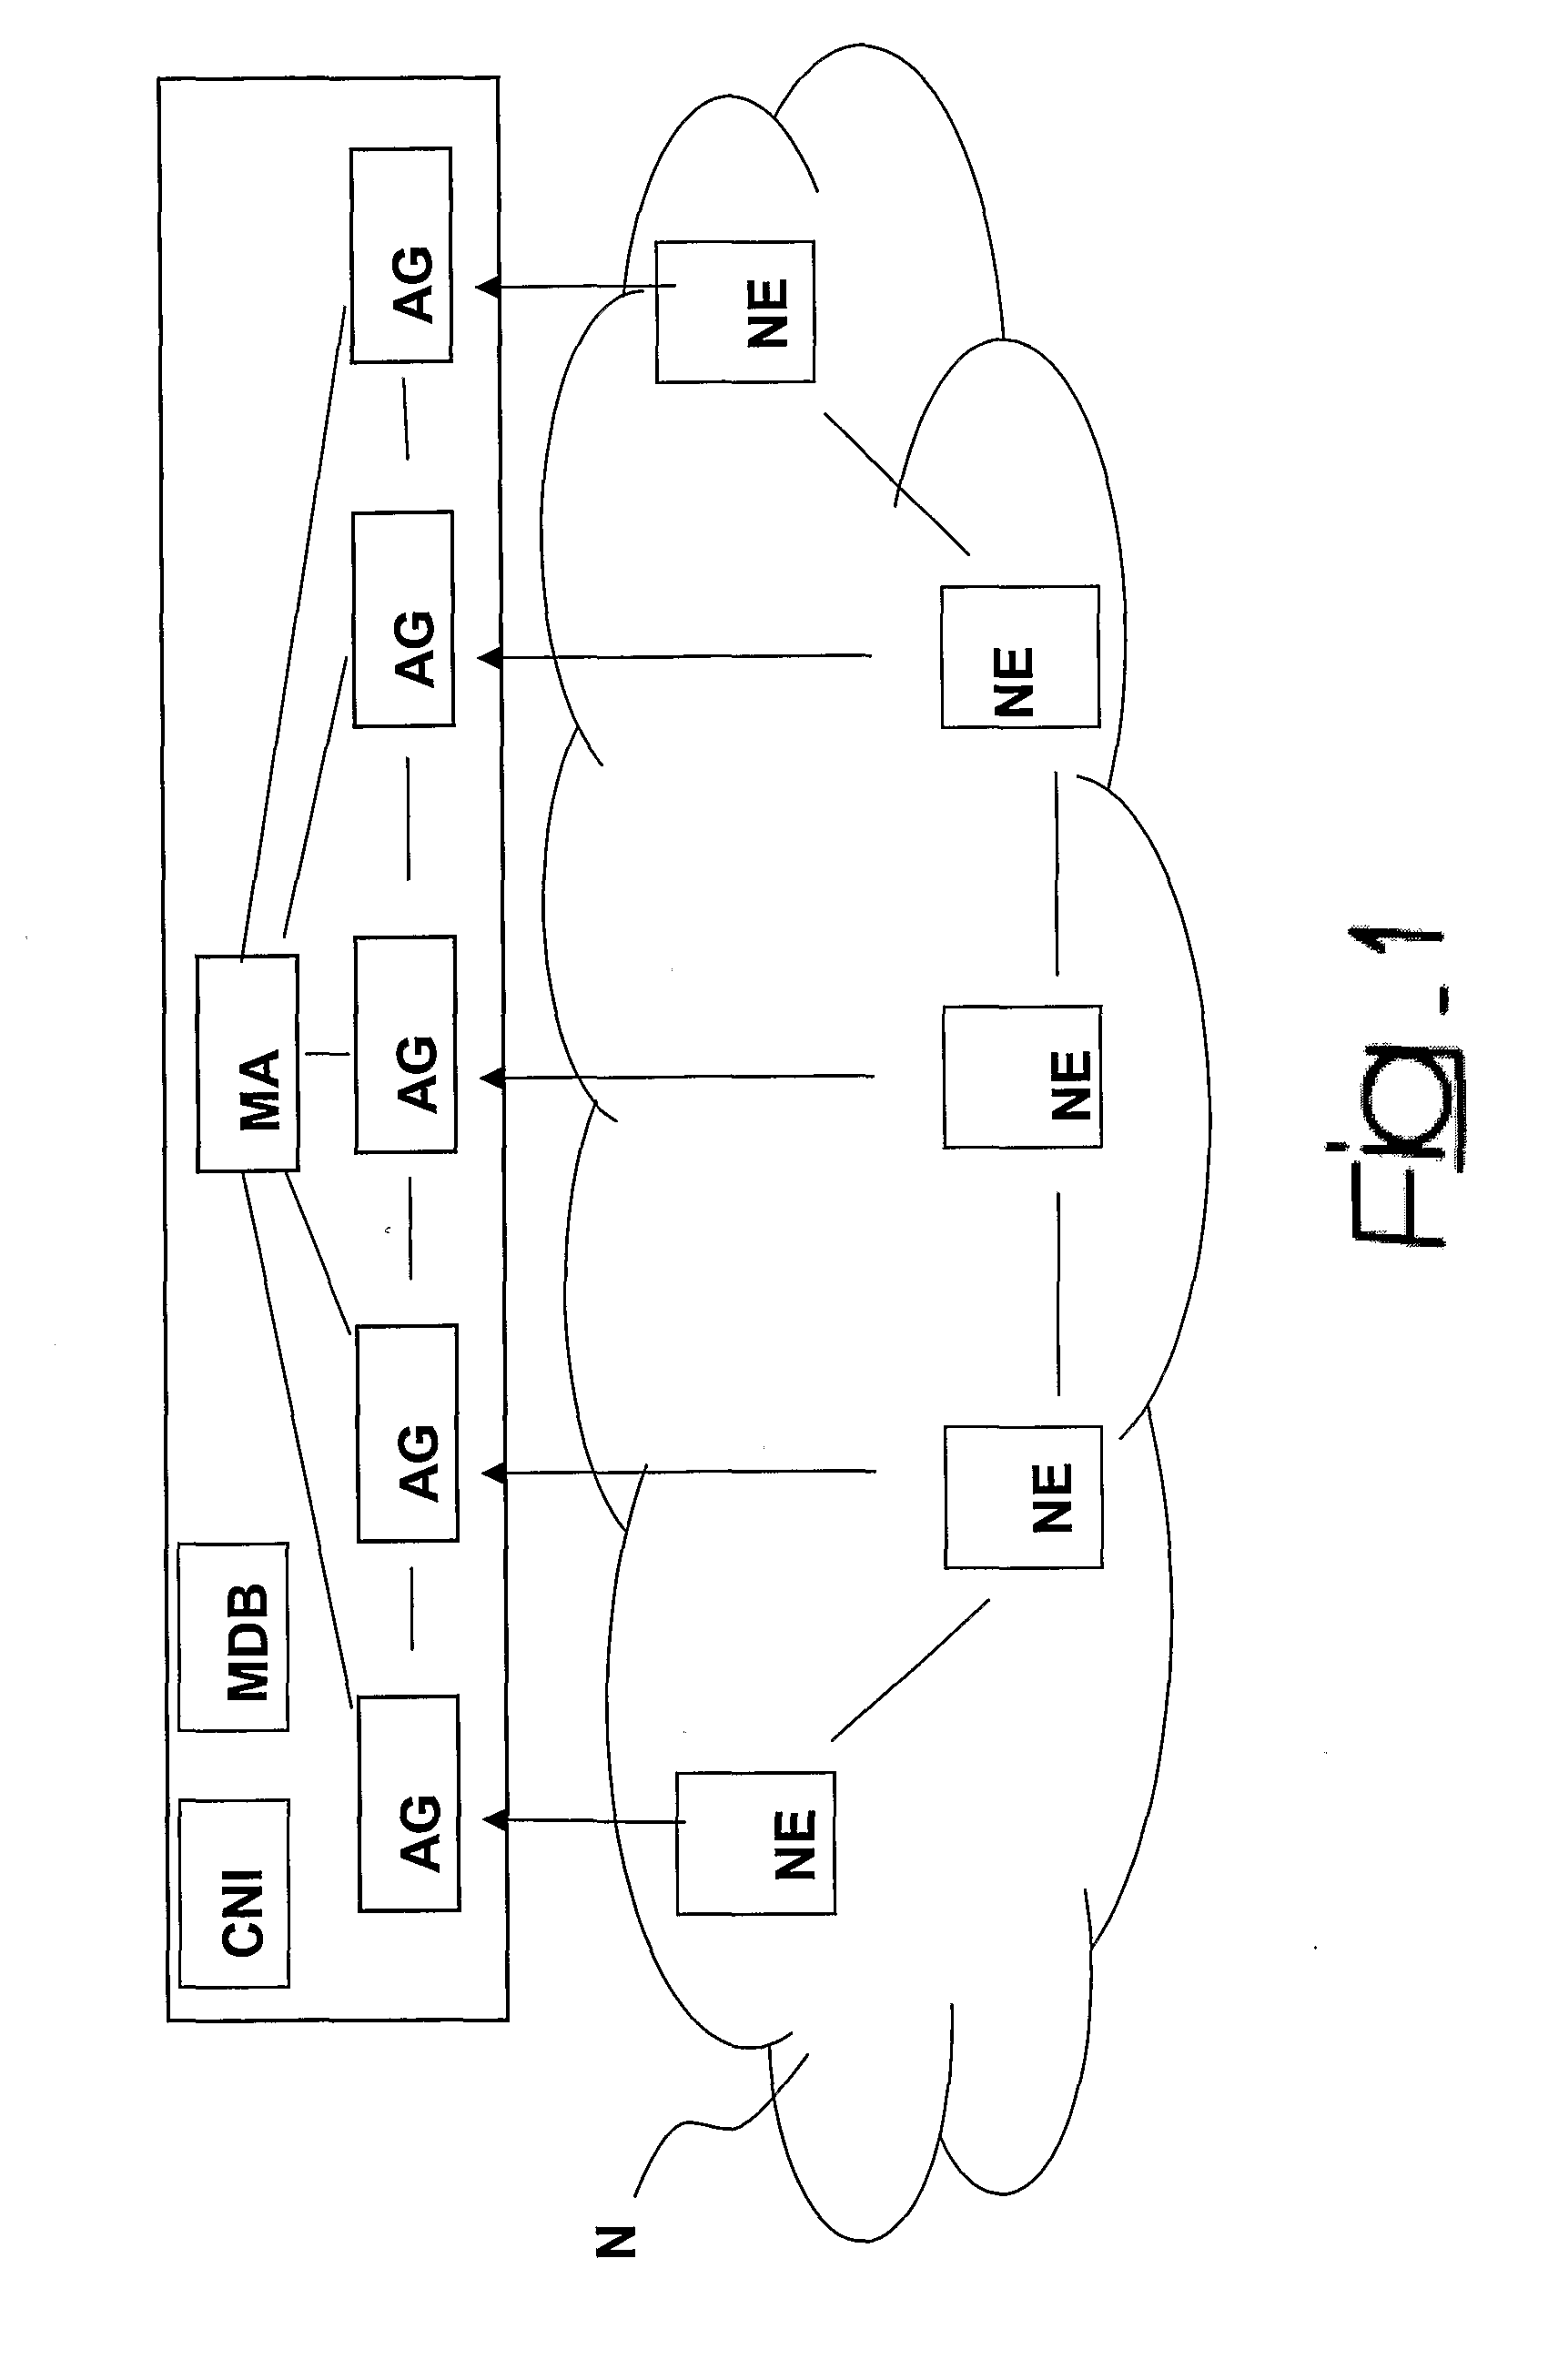 Method and System for Identifying Faults In Communication Networks